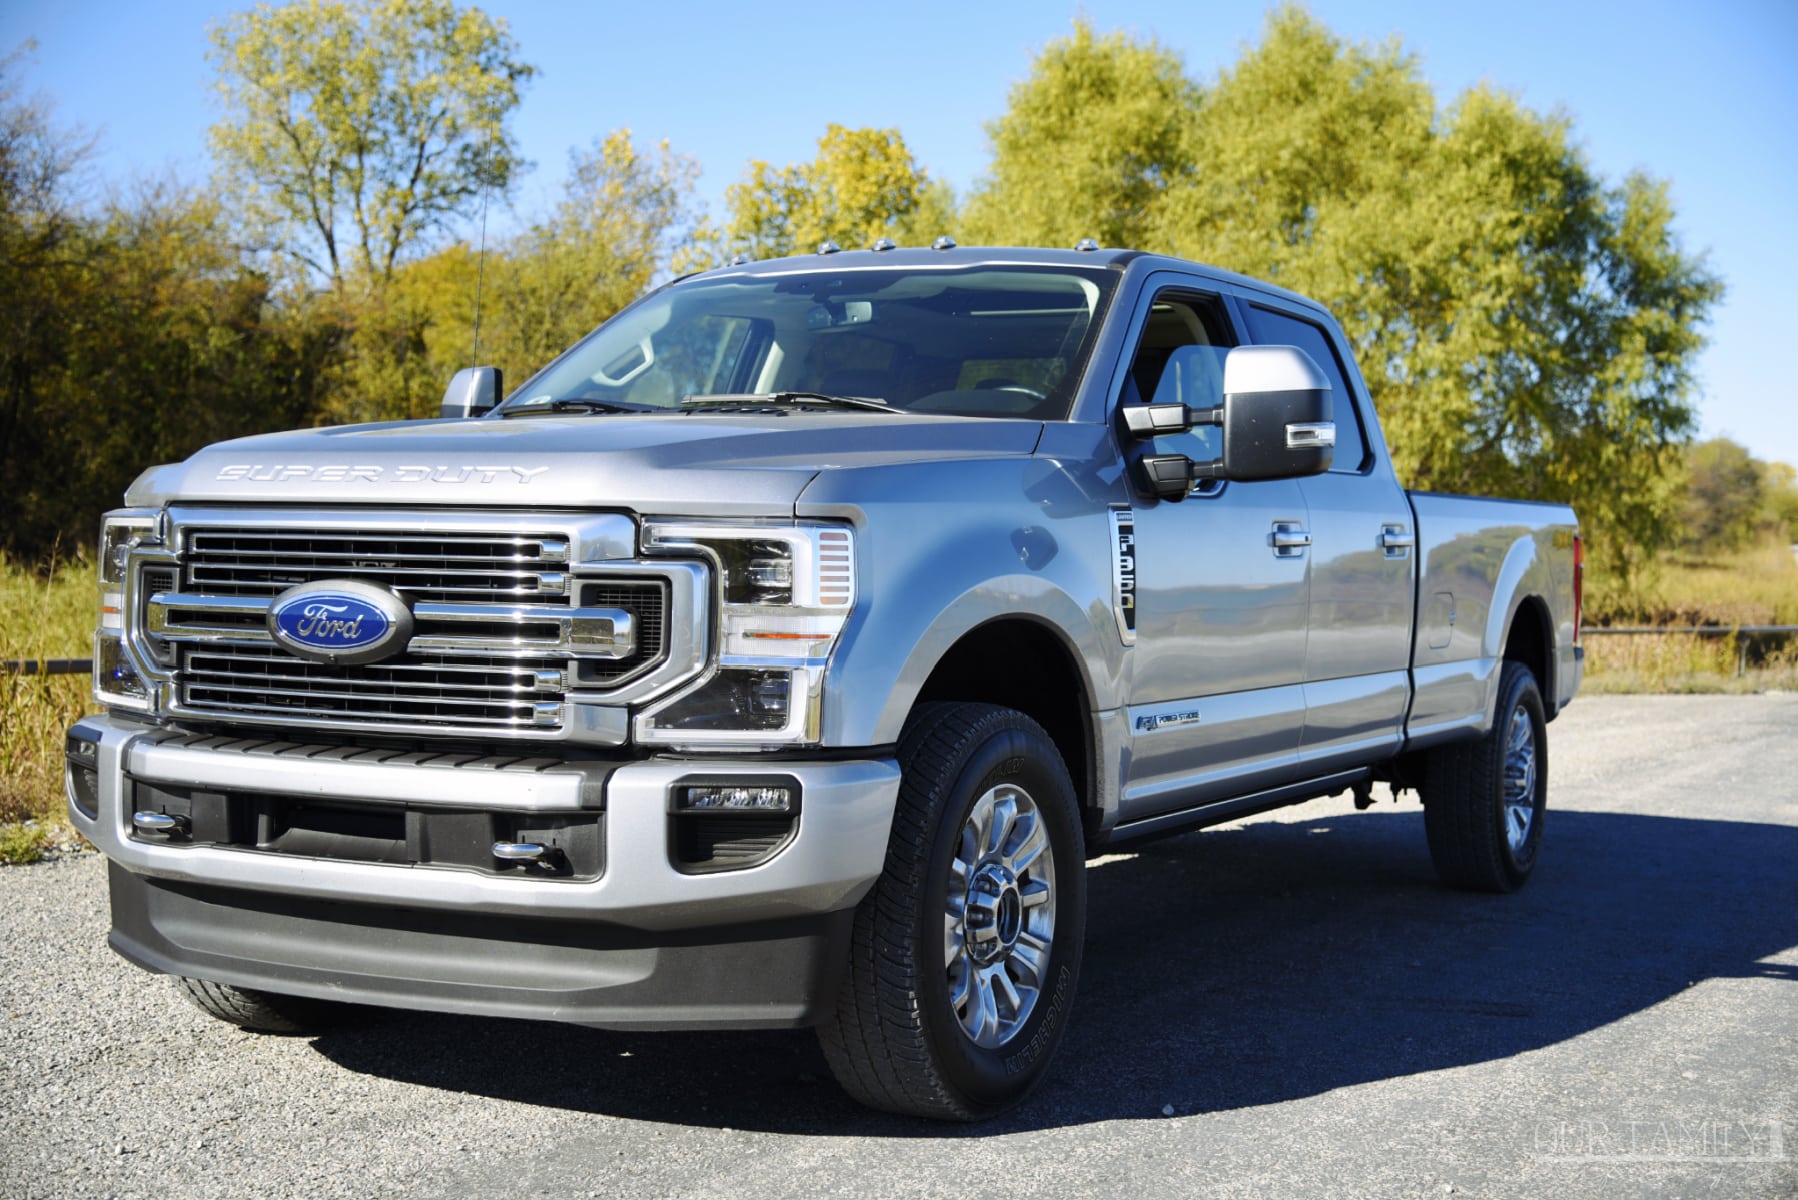 2020 Ford F-350 Super Duty is Built for Towing